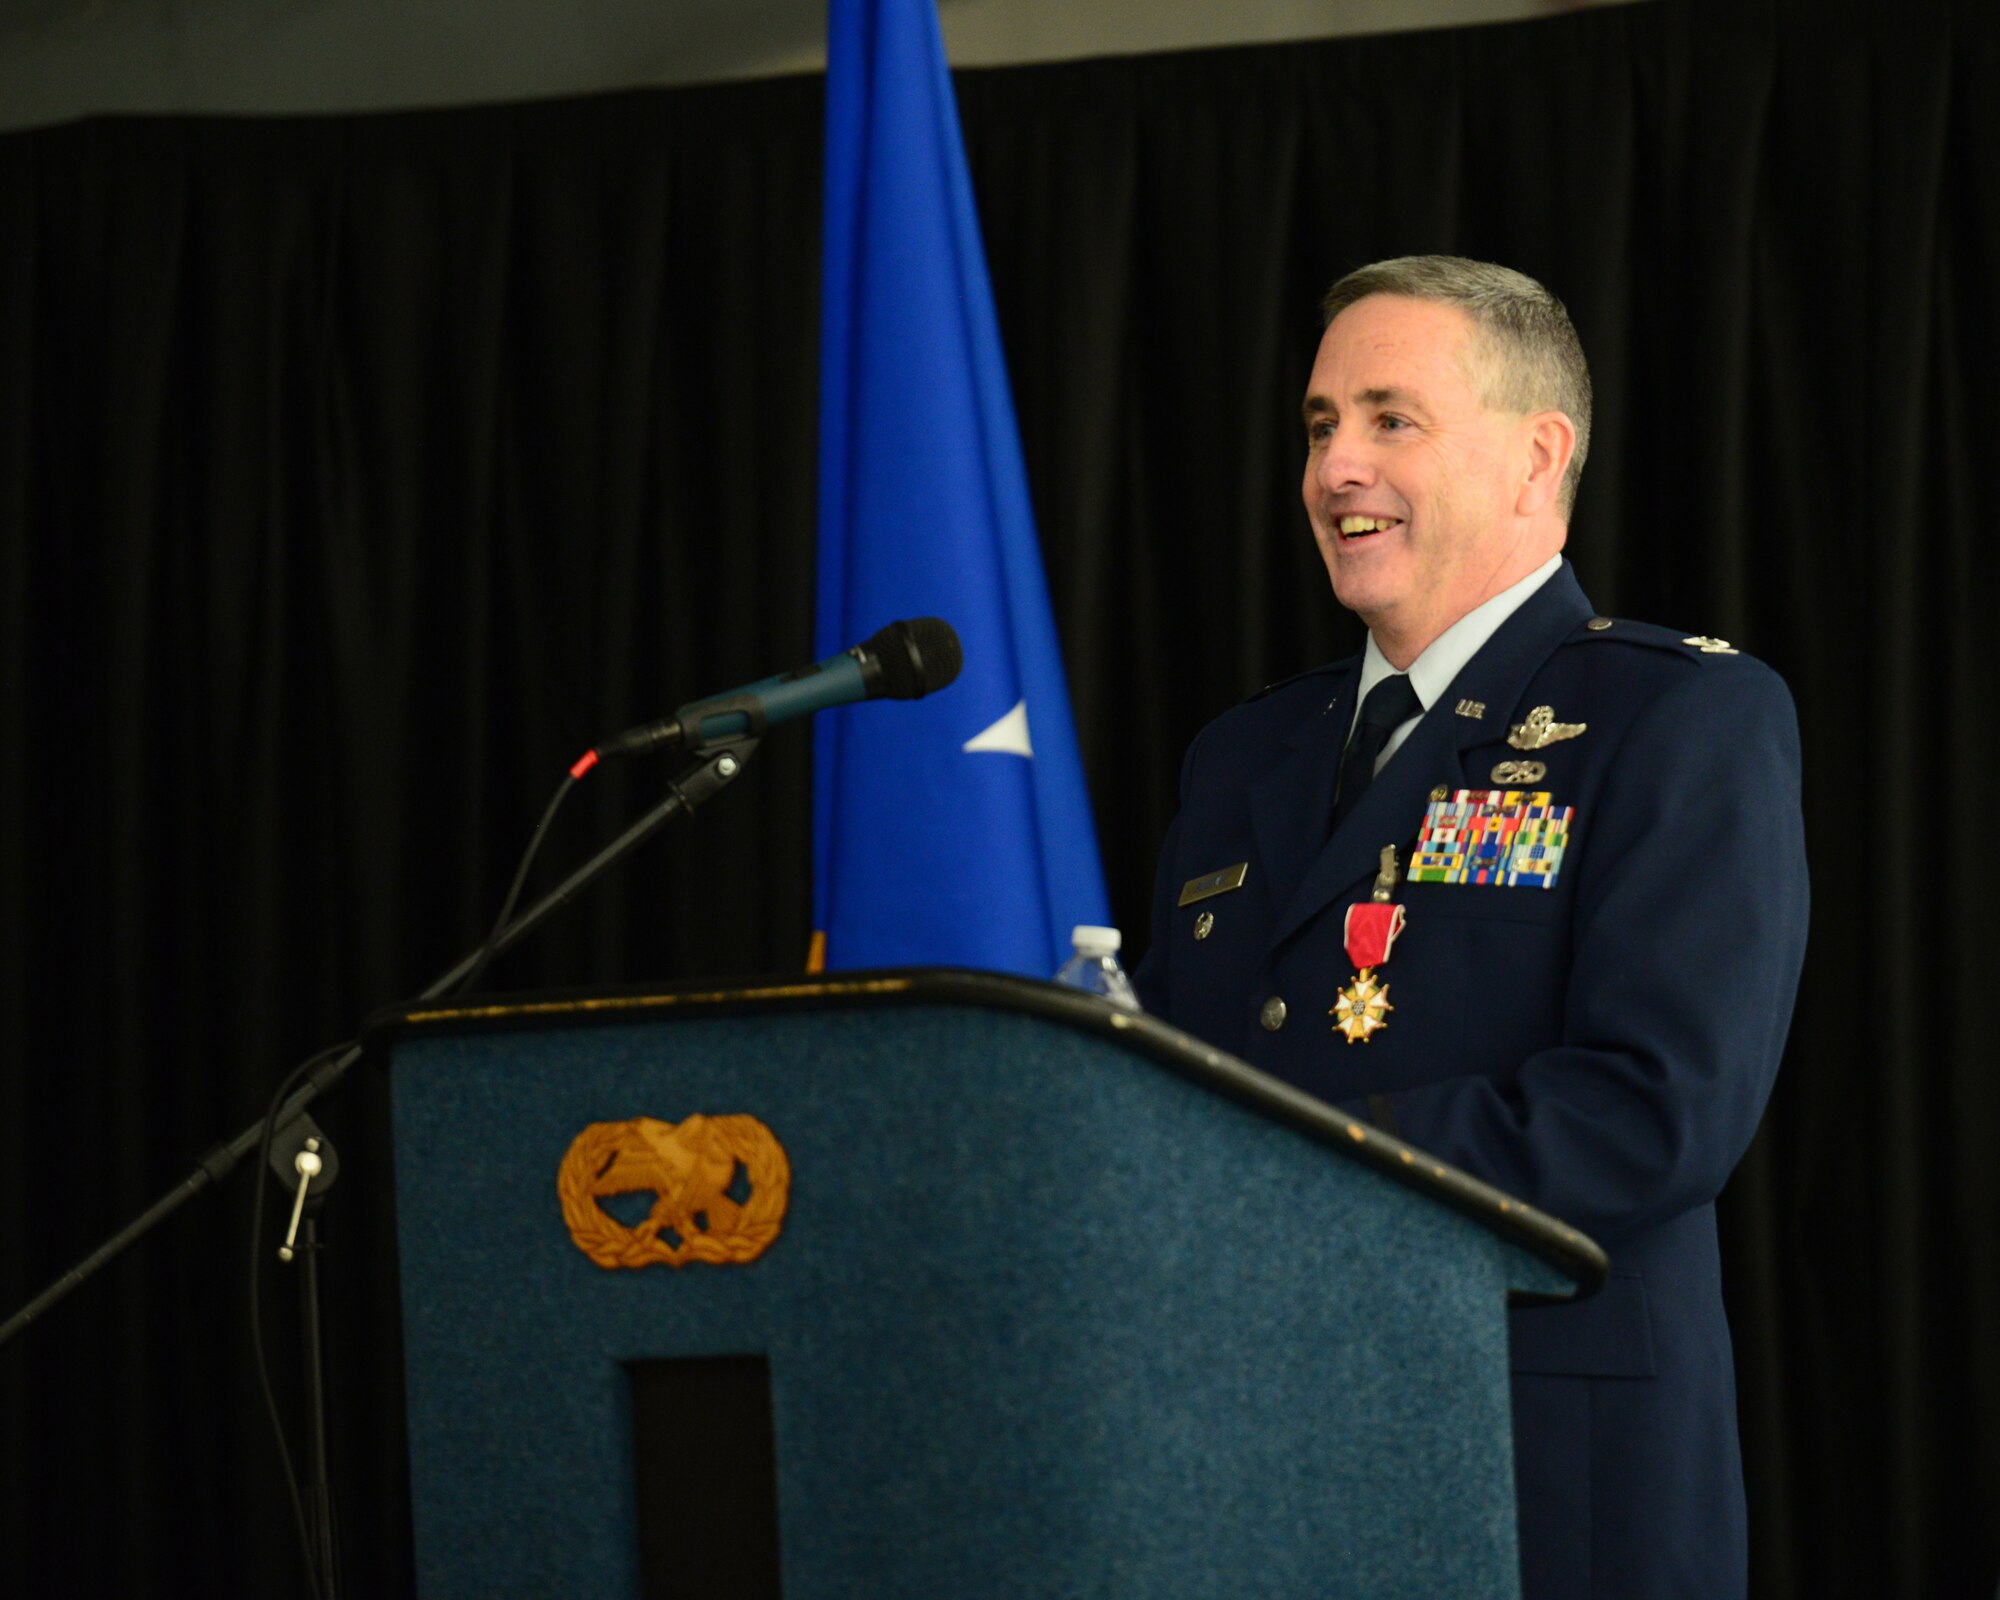 U.S. Air Force Col. Peter Sullivan, 157th Air Refueling Wing vice wing commander, New Hampshire Air National Guard, speaks to family, friends, and members of the 157 ARW during his retirement ceremony, Pease Air National Guard Base, N.H., Oct. 15, 2016.  Sullivan retired with 34 years of service.  (U.S. Air National Guard photo by Senior Airman Ashlyn J. Correia)